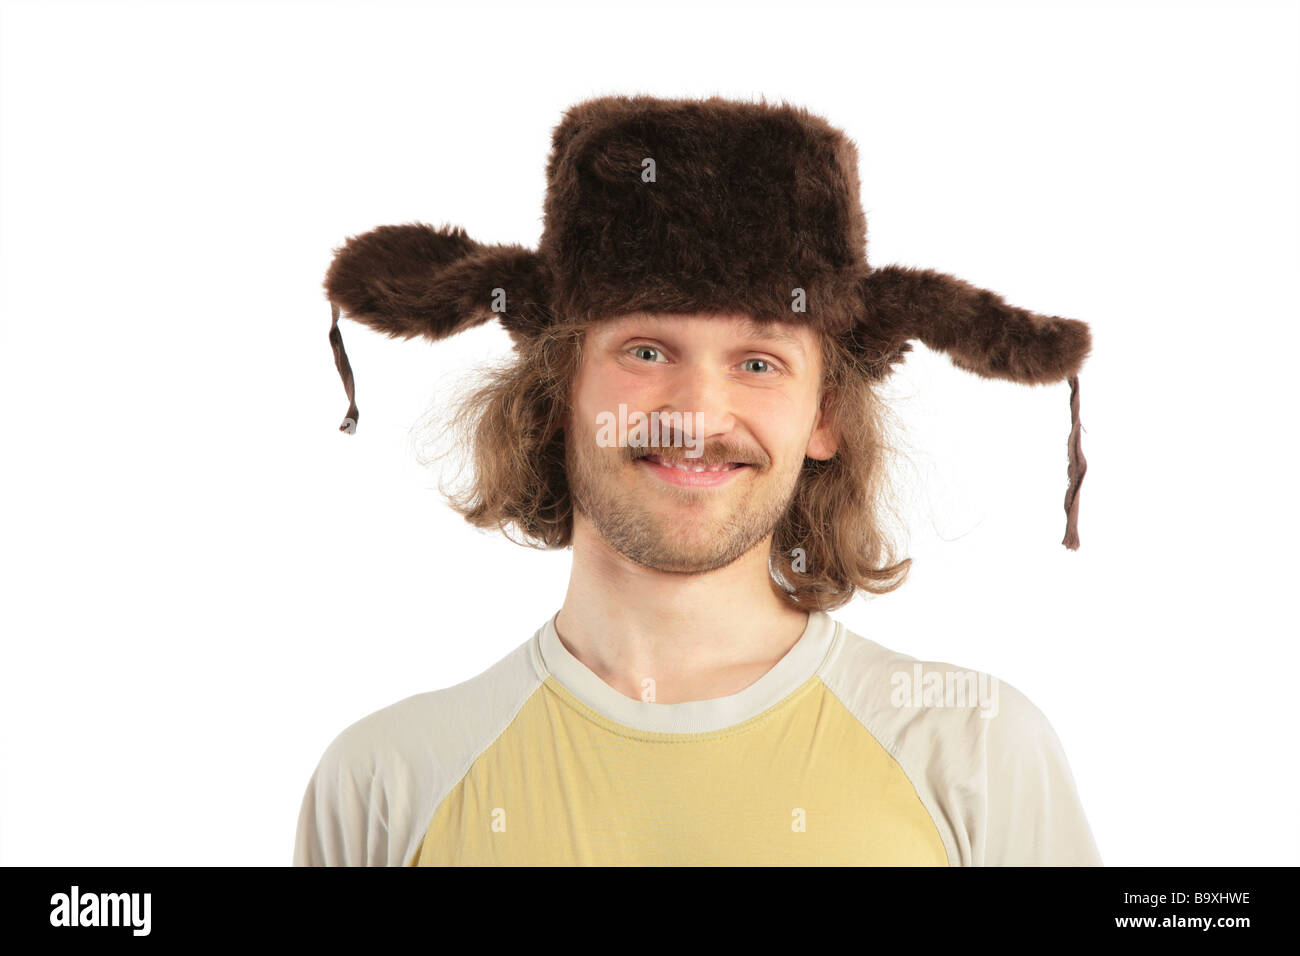 Ushanka Hat, for man.  Hat aesthetic, Popular hats, Outfits with hats